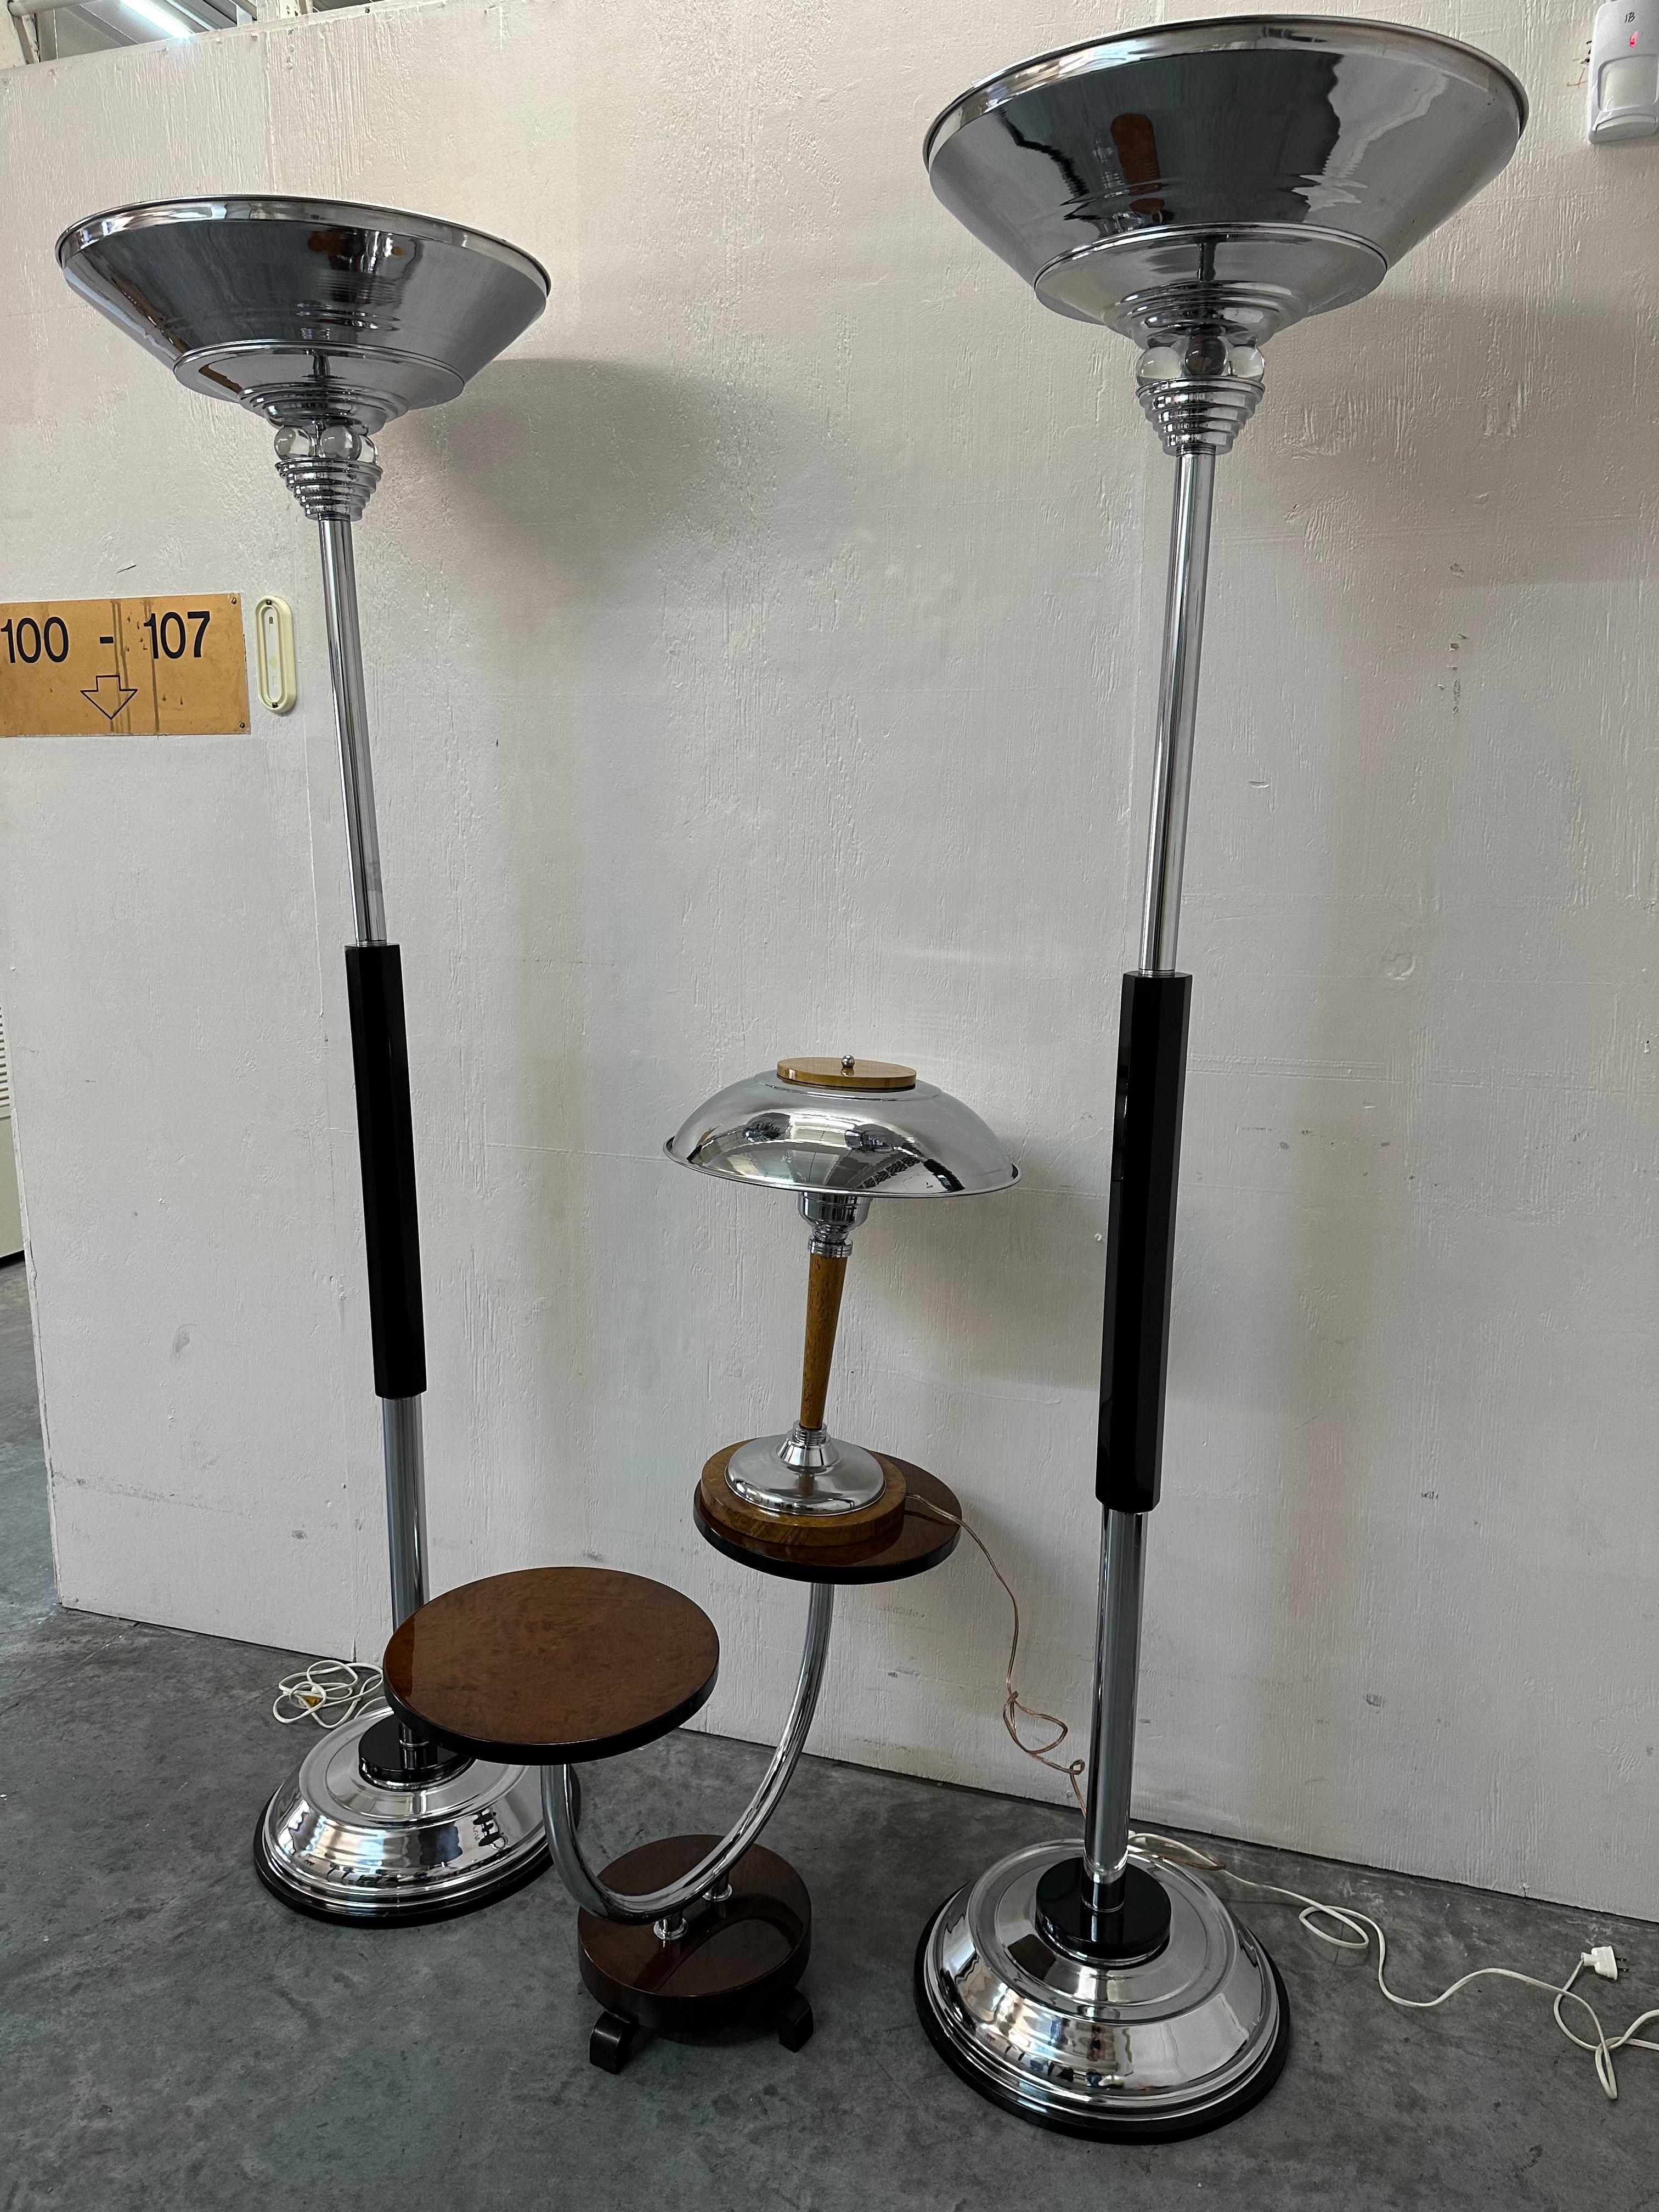 2 Art Deco Floor Lamps, France, Materials: Wood, glass and Chrome, 1940 For Sale 1